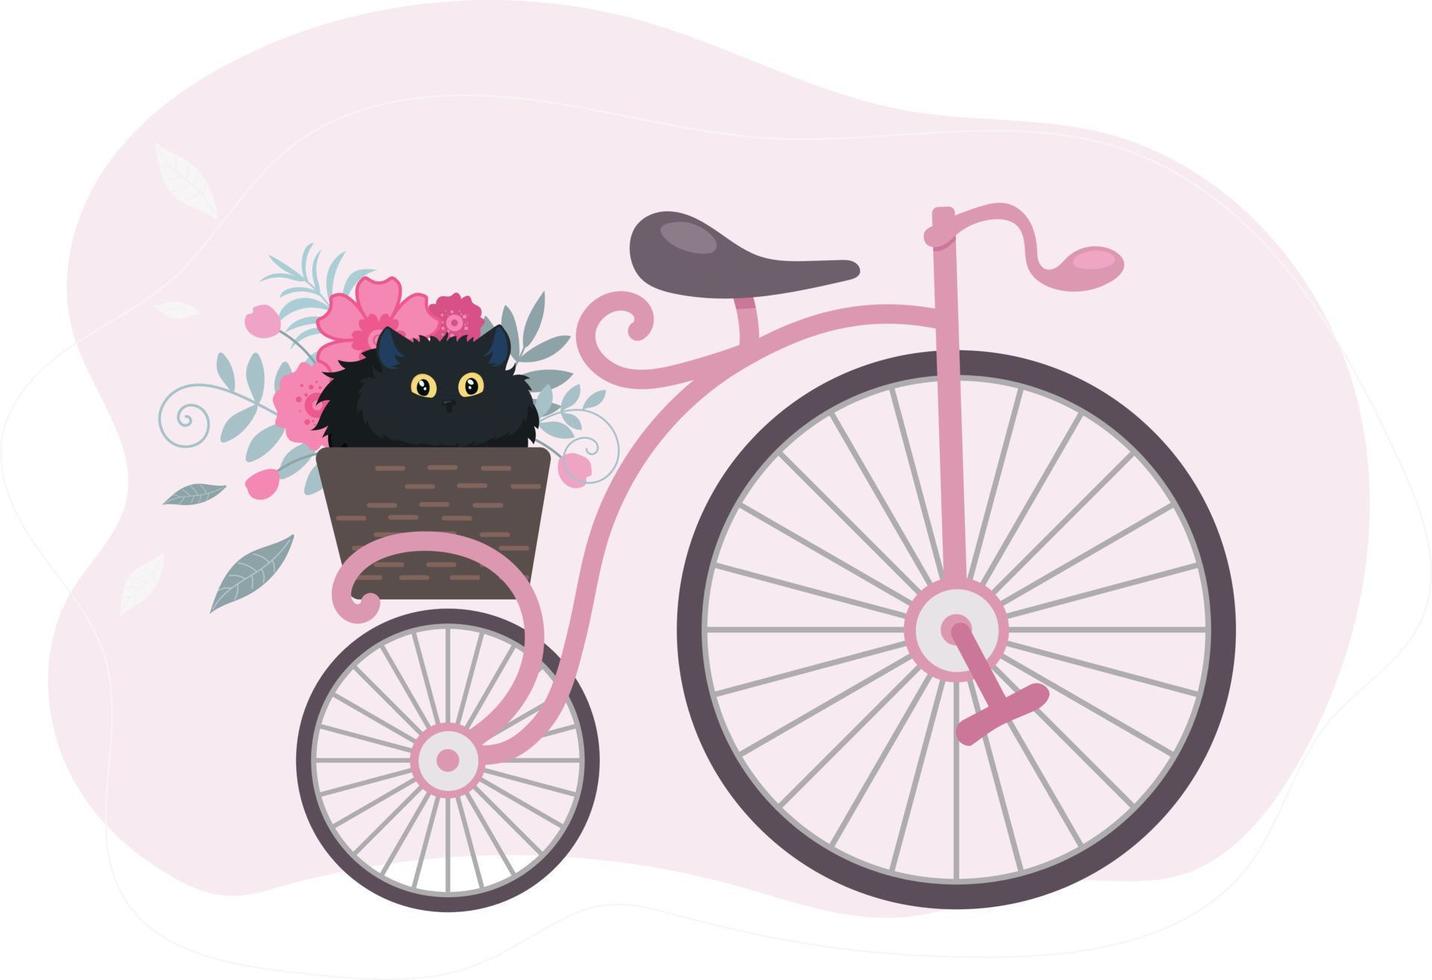 Retro vintage bicycle with a basket of flowers and a black cat. illustration in cartoon flat style vector